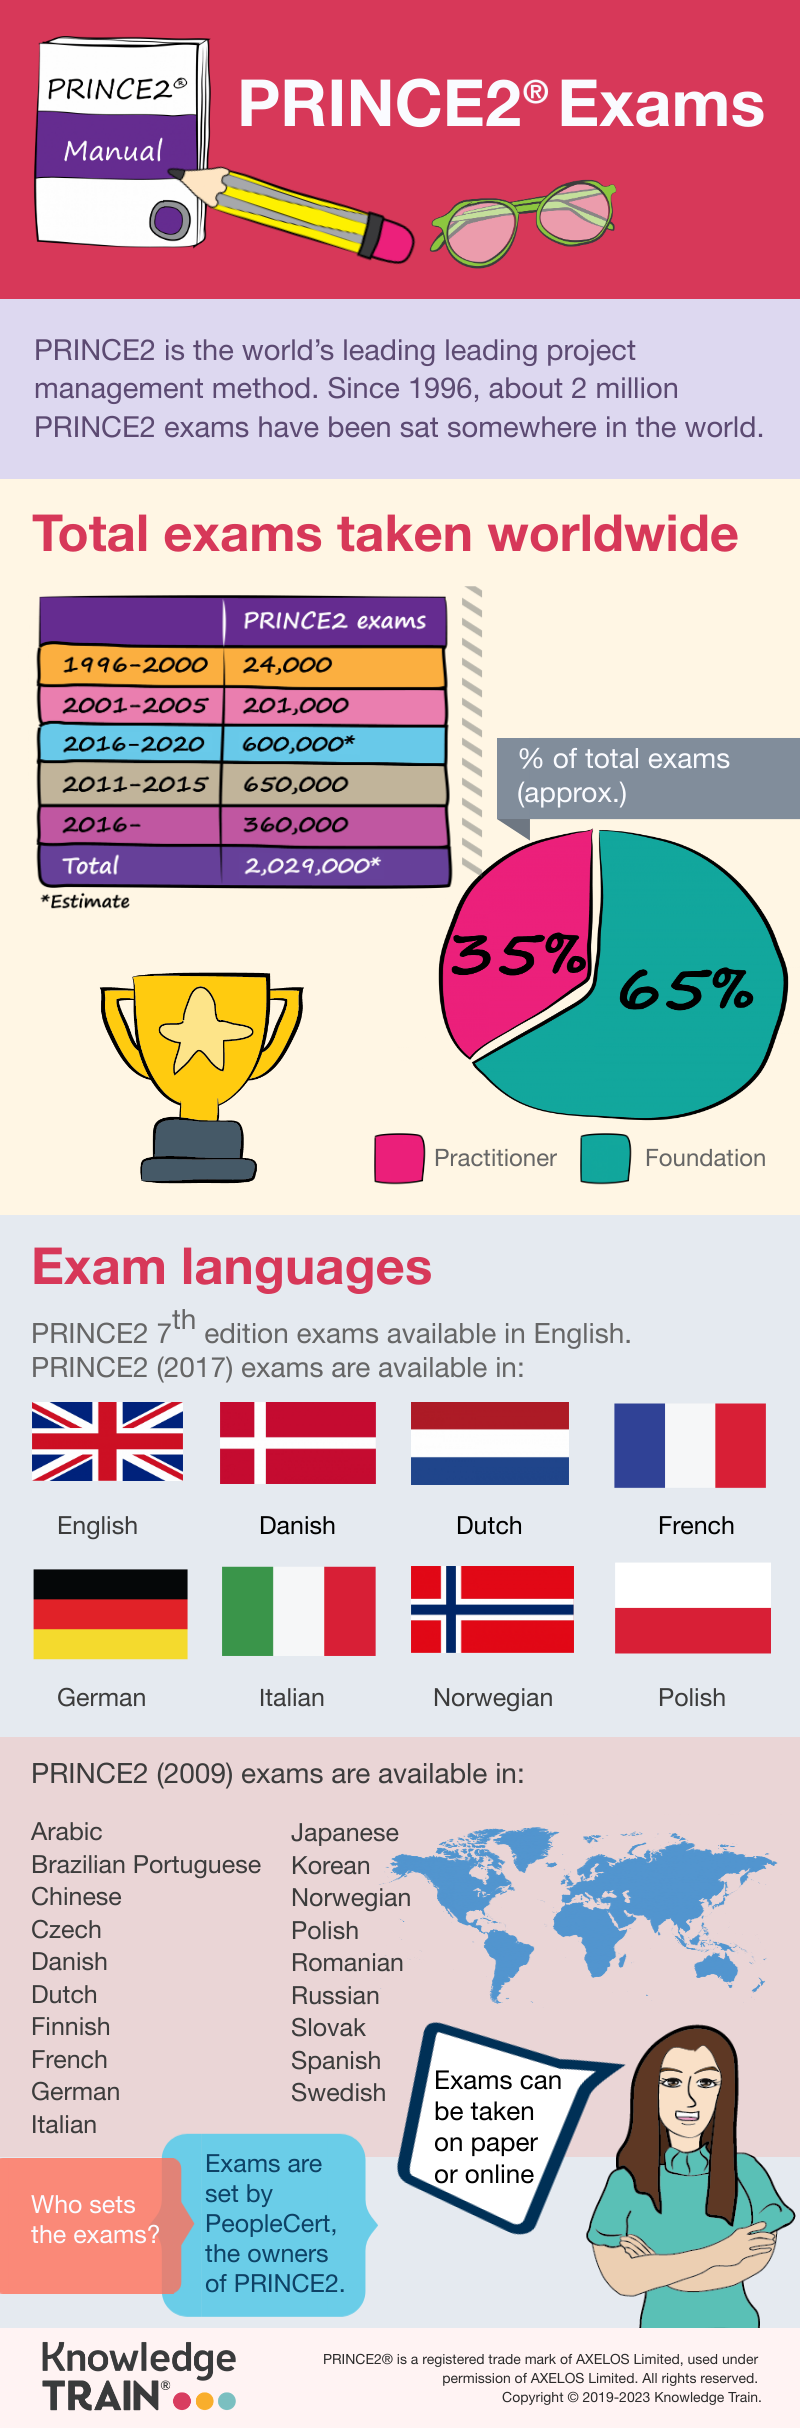 Infographic showing PRINCE 2 exams taken worldwide and the countries and languages that PRINCE2 exams are available in.